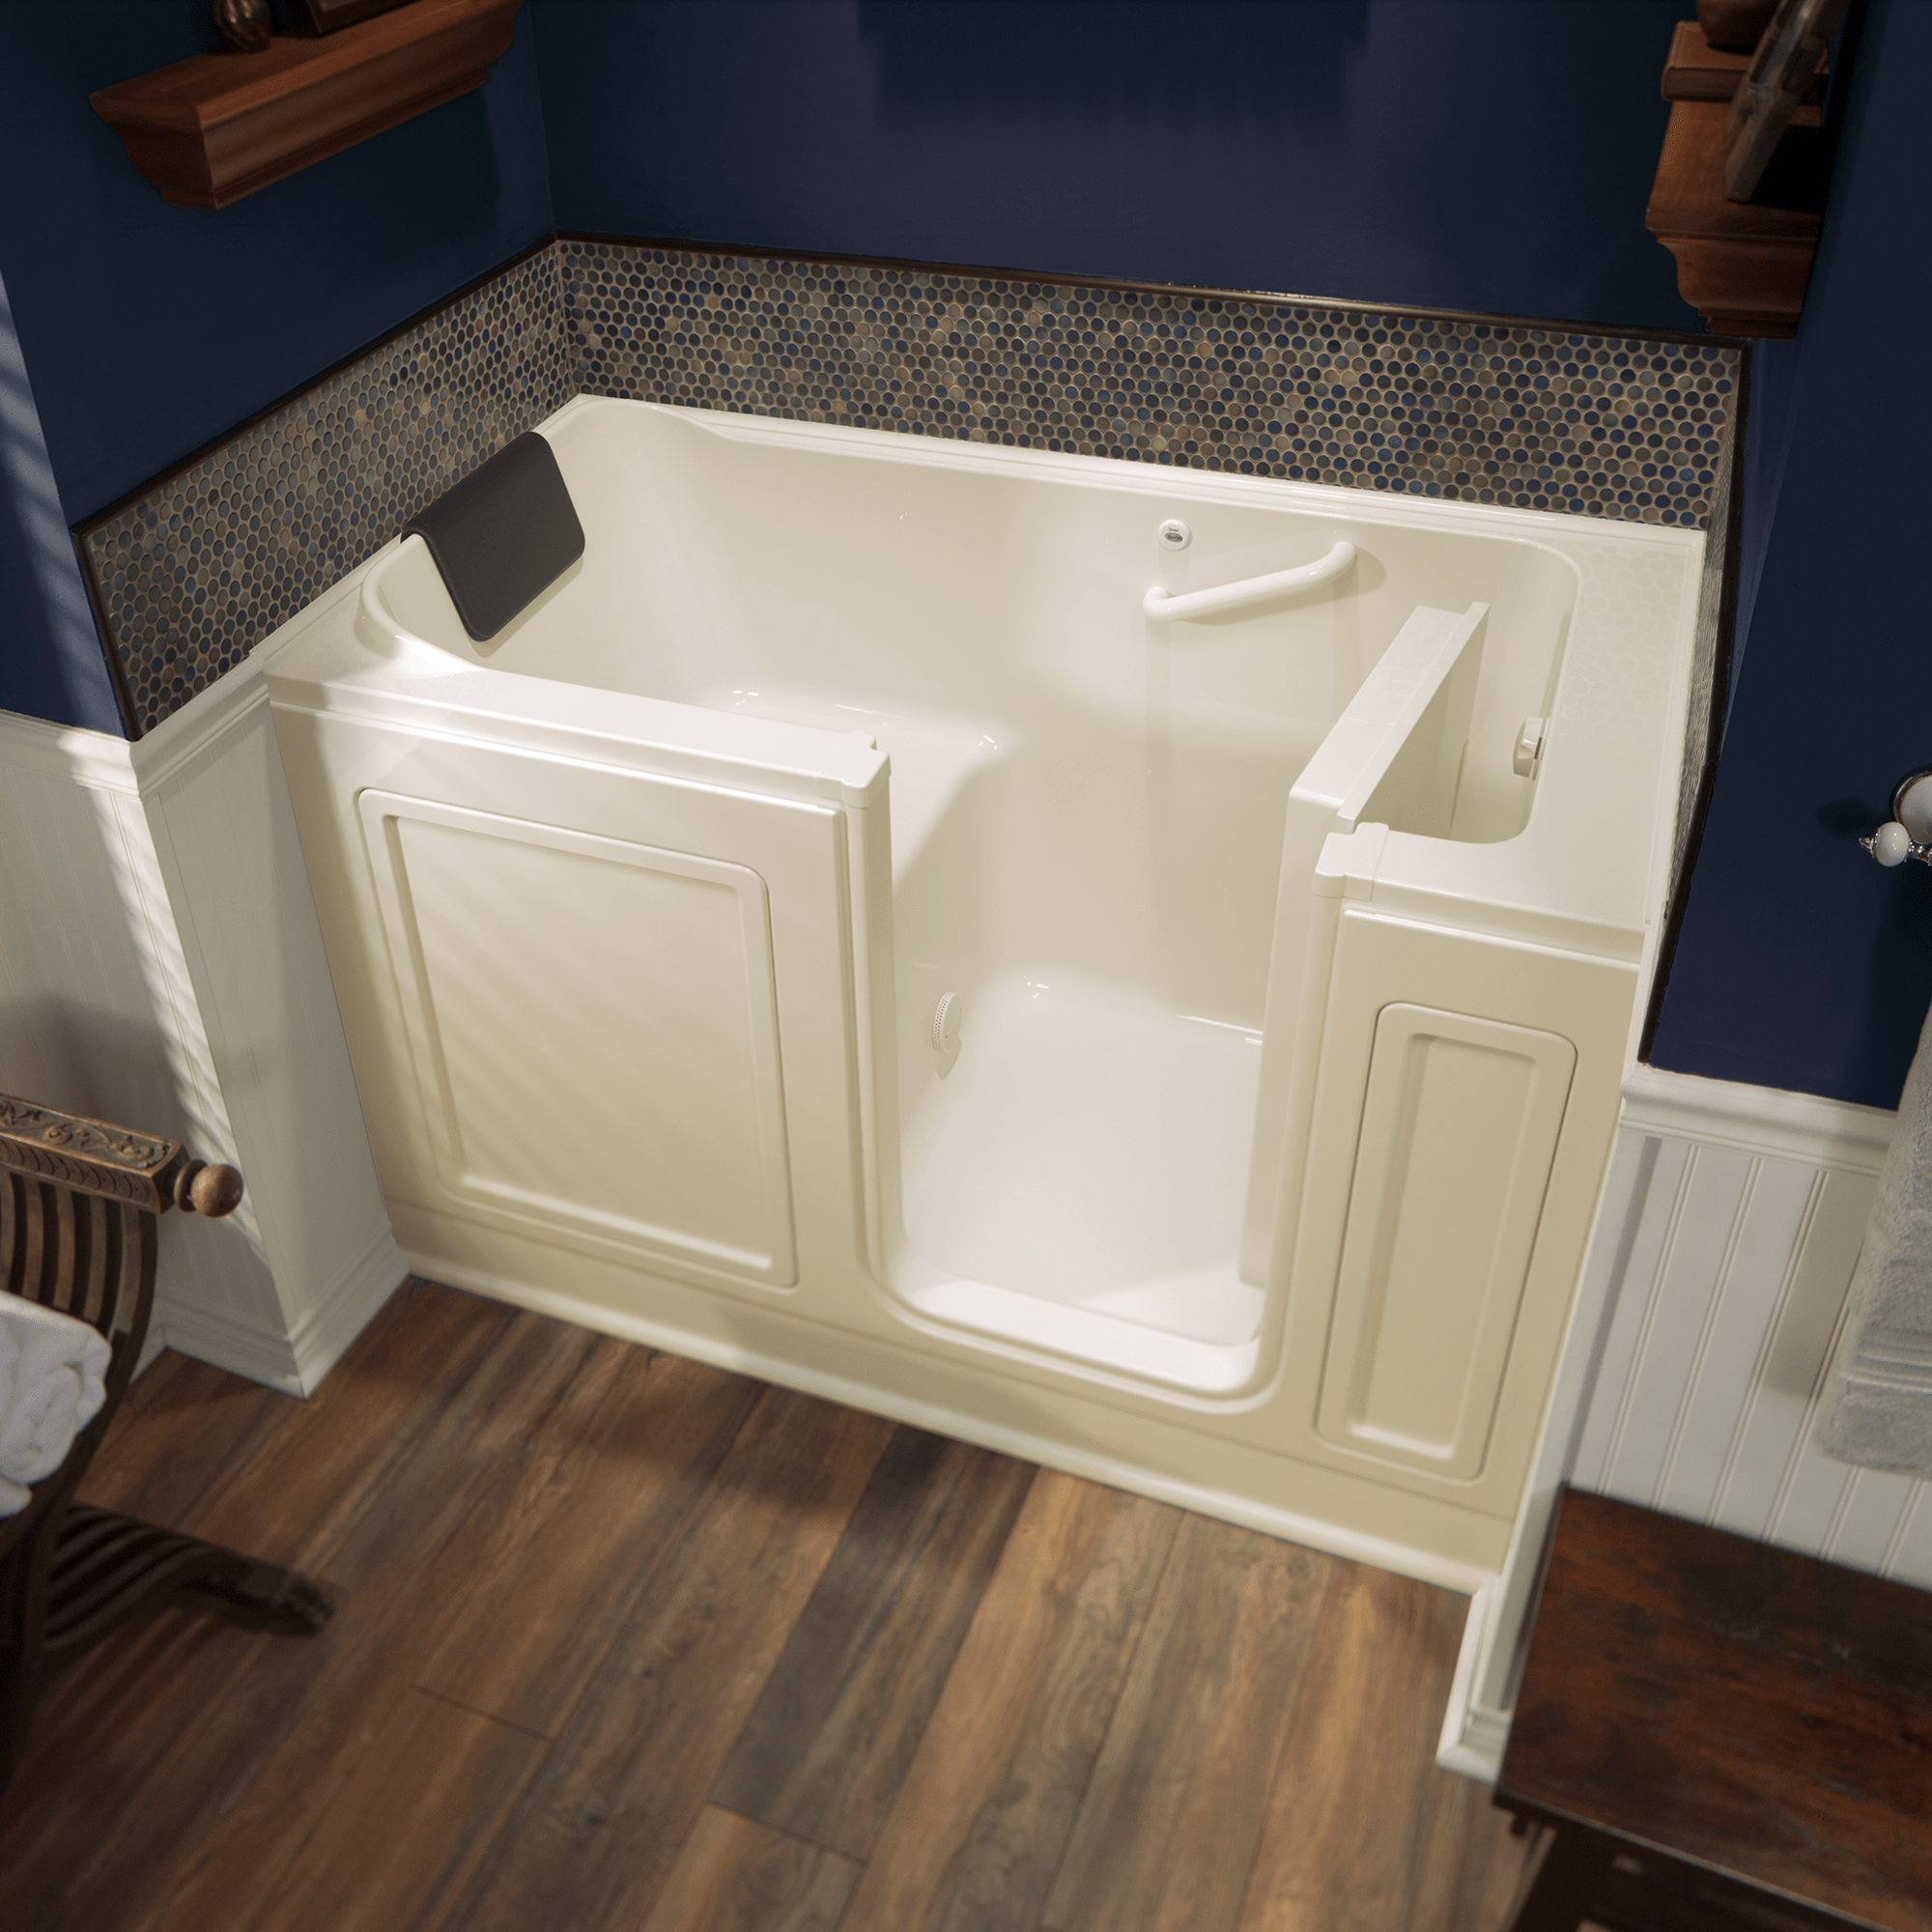 Acrylic Luxury Series 32 x 60 -Inch Walk-in Tub With Soaker System - Right-Hand Drain